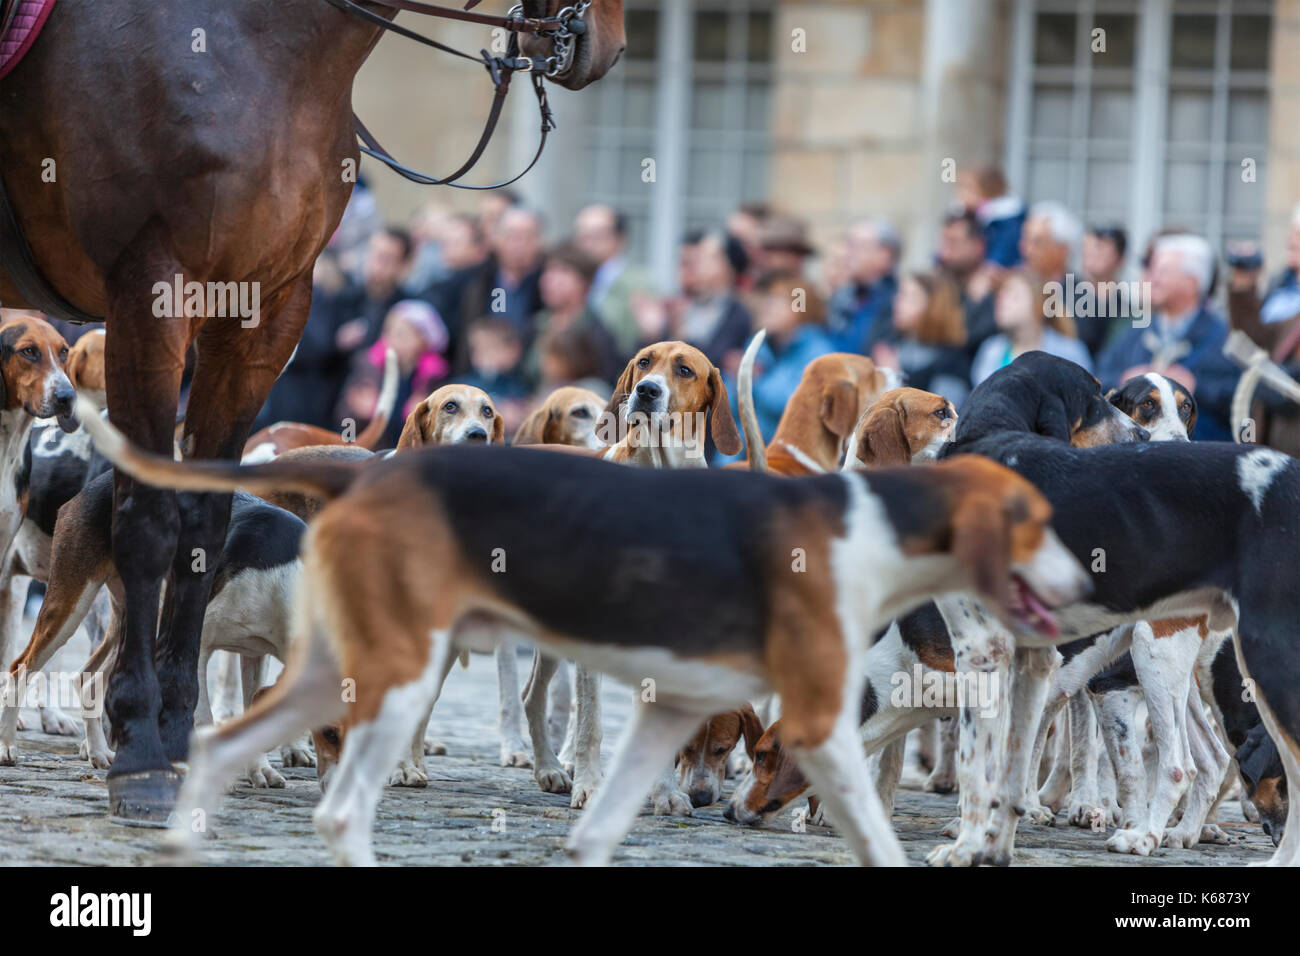 Environmental portrait of a hound during a traditional French hounds show. Stock Photo